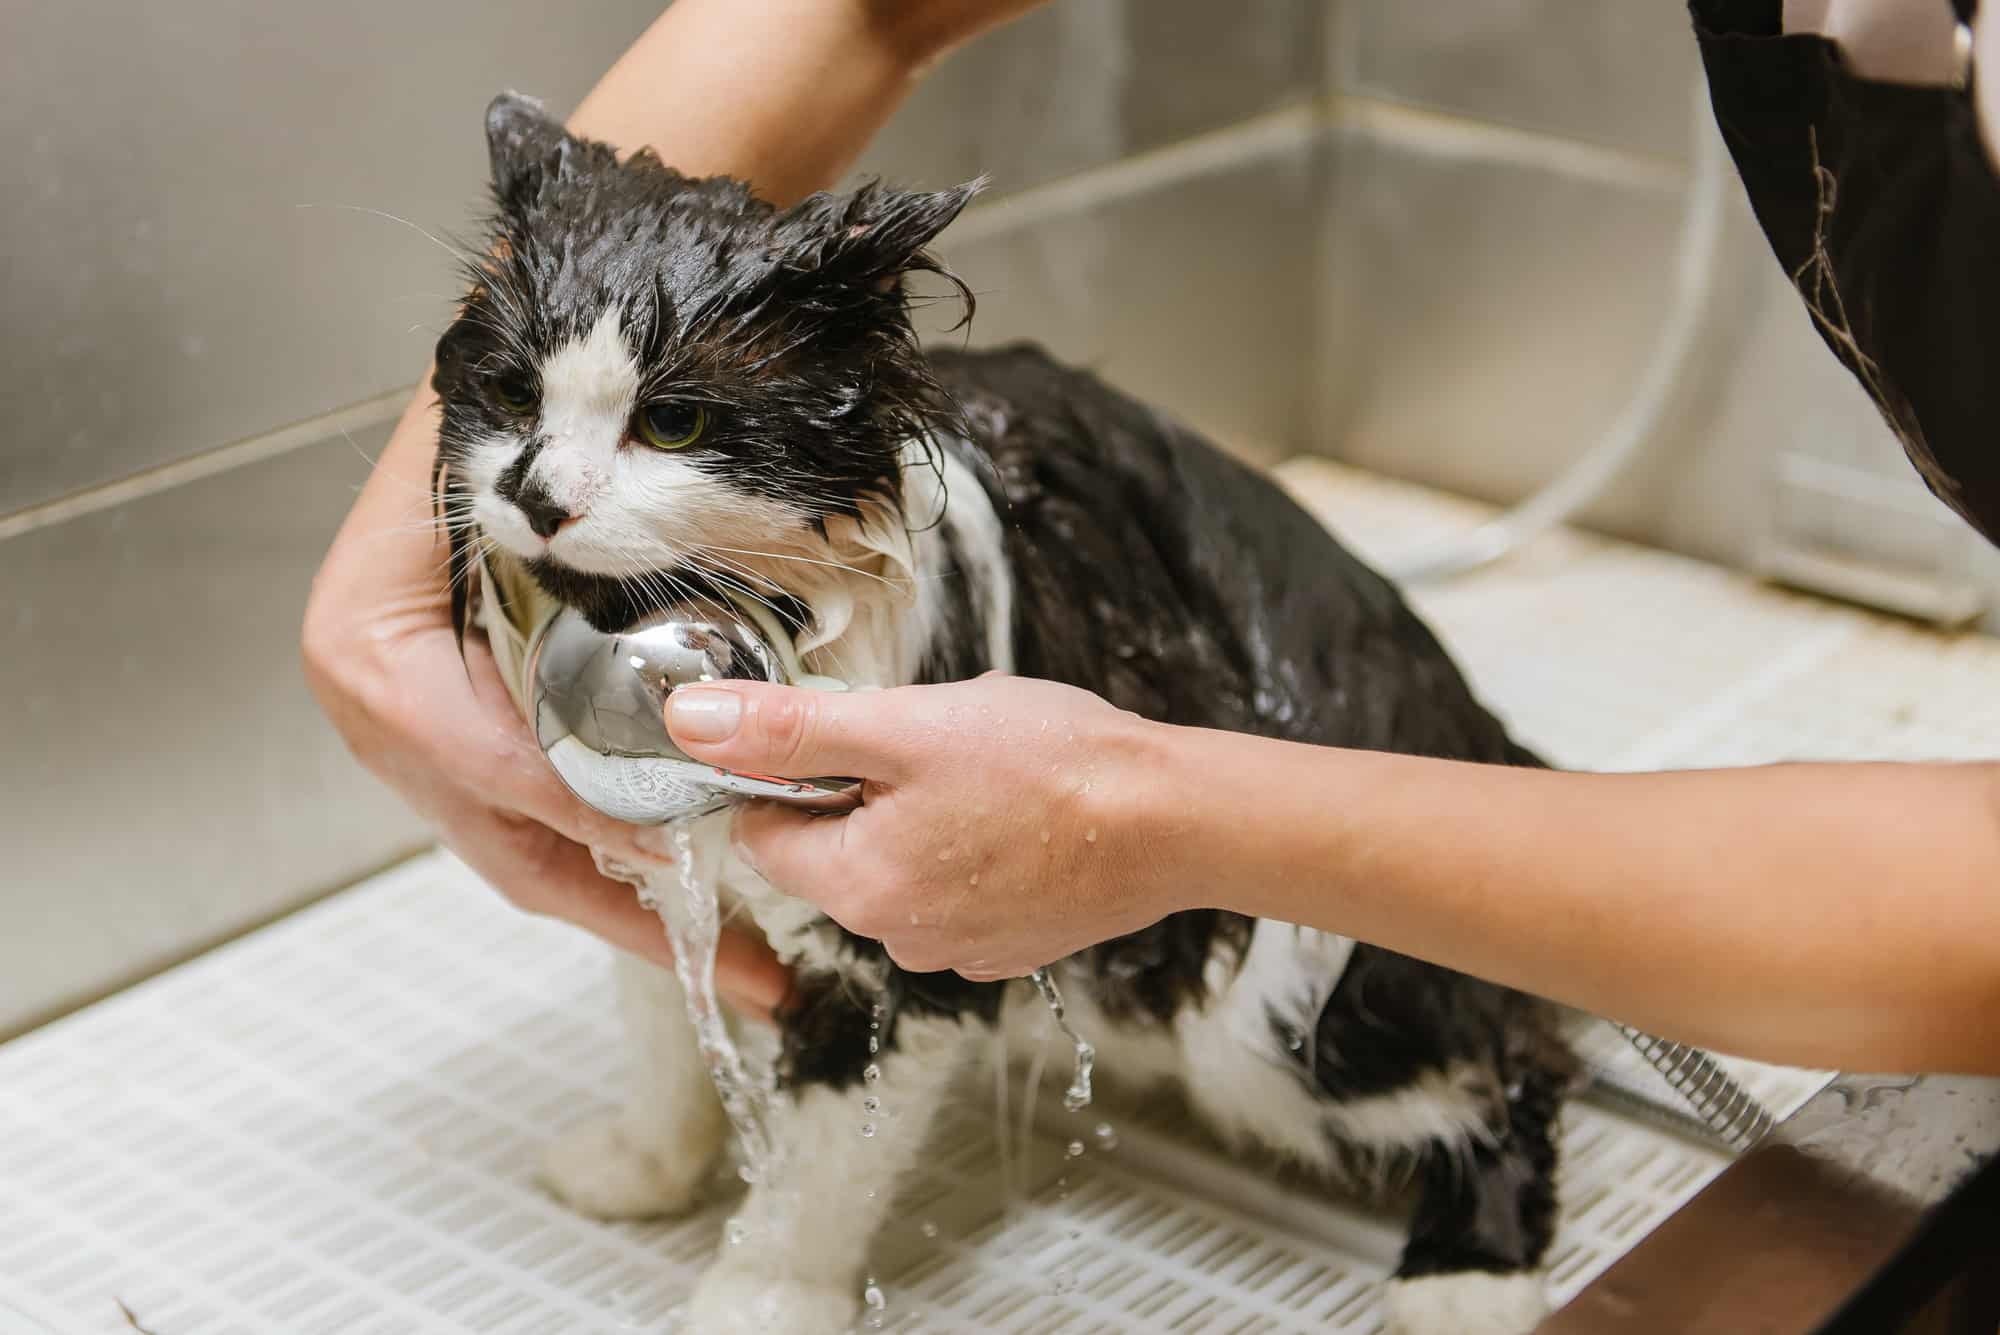 What Can I Use To Wash My Cat? - Pets Gal